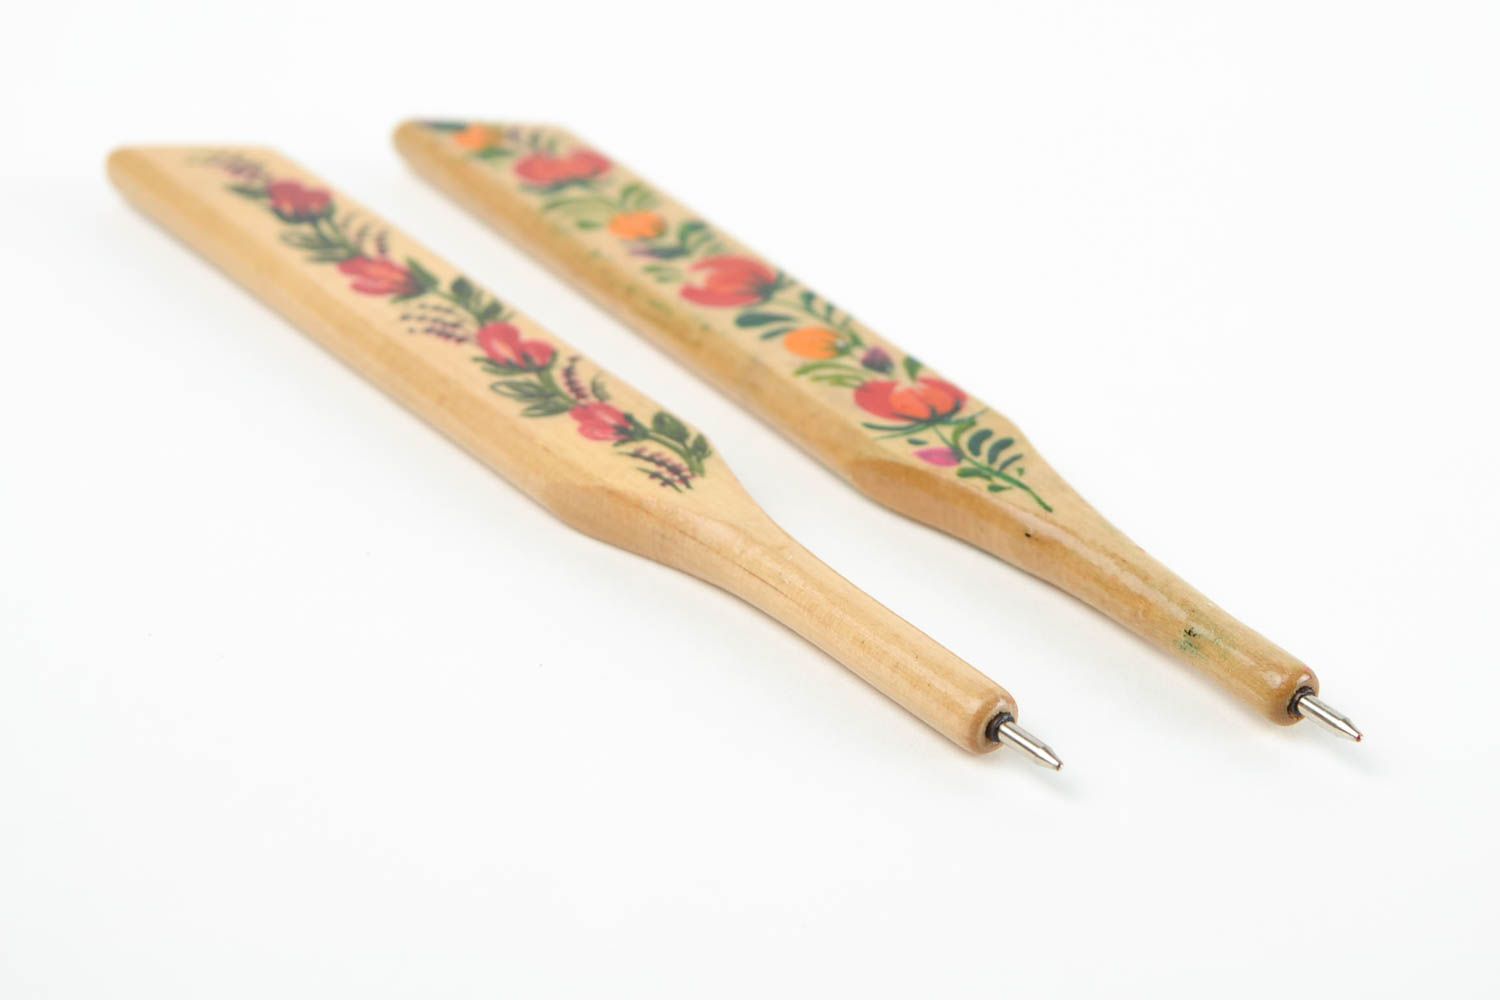 Handmade pen wooden pen for notes set of 2 items gift ideas wooden stationery photo 5